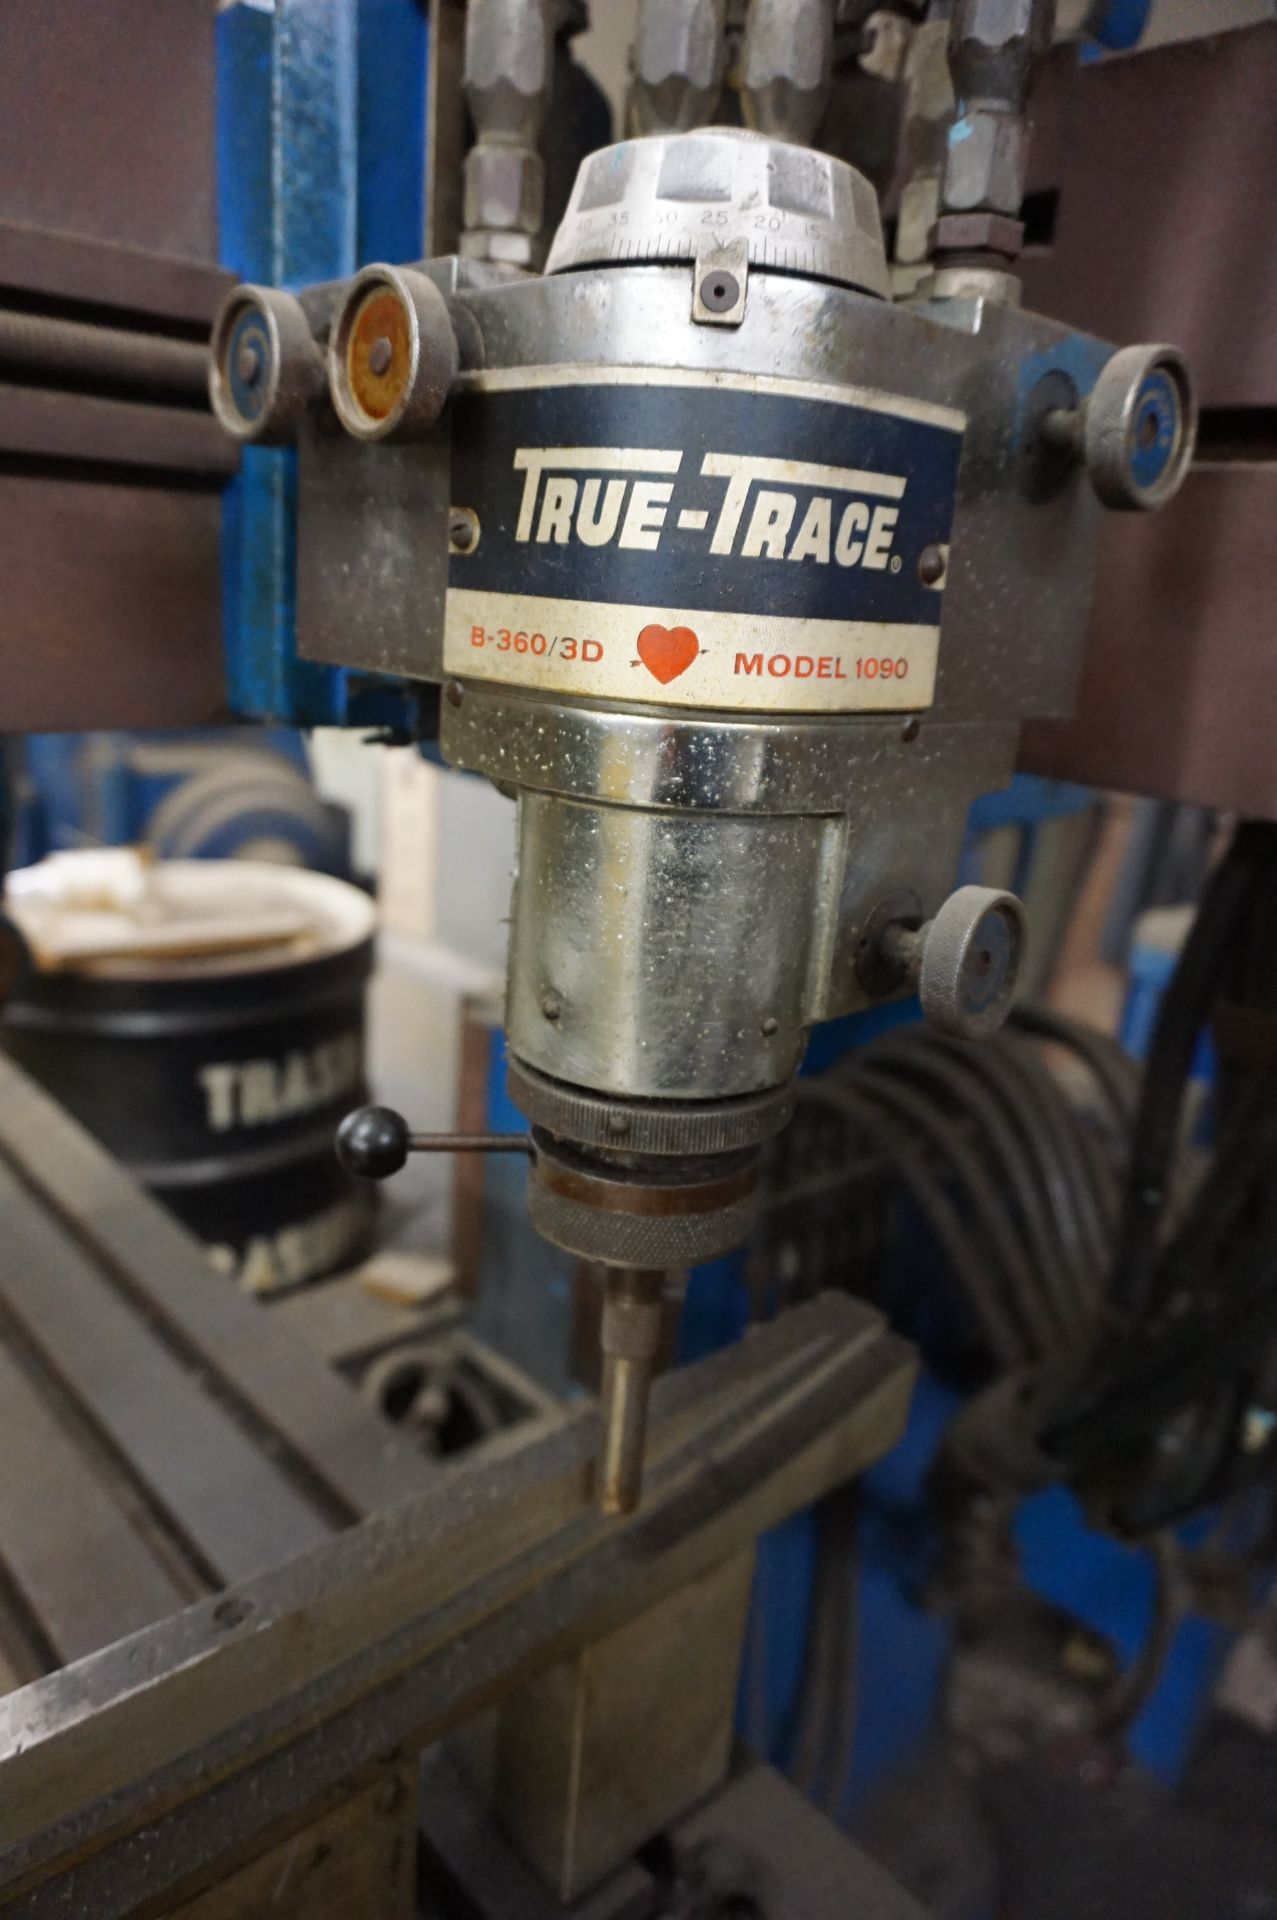 BRIDGEPORT MILLING MACHINE S/N J-56458 WITH TRUE-TRACE B-360/3D MODEL 1090 *NOT RUNNING* **Rigging - Image 6 of 6